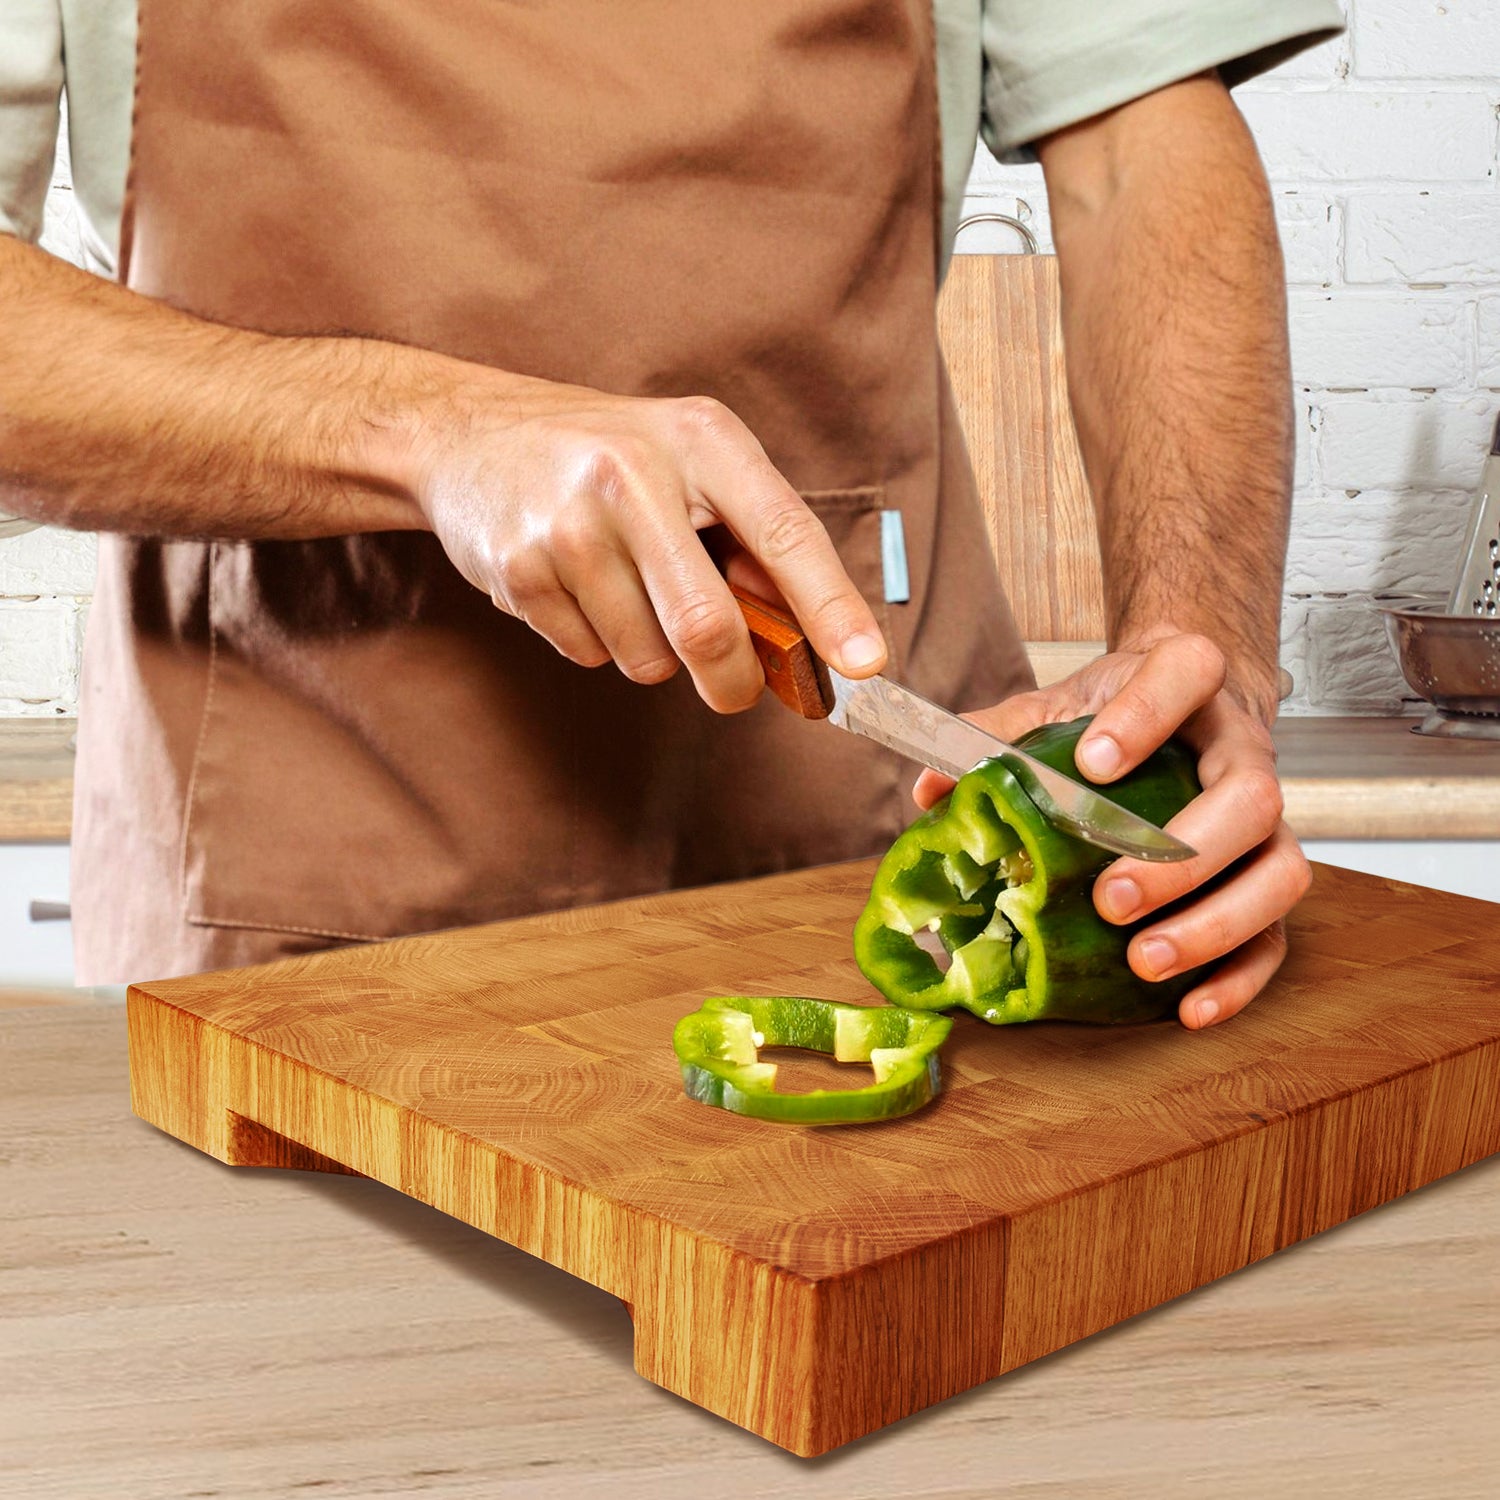 Wooden Cutting Board for Kitchen (20 x 12 Inches) - Kitchen Essentials for Cooking - Large Cutting Board